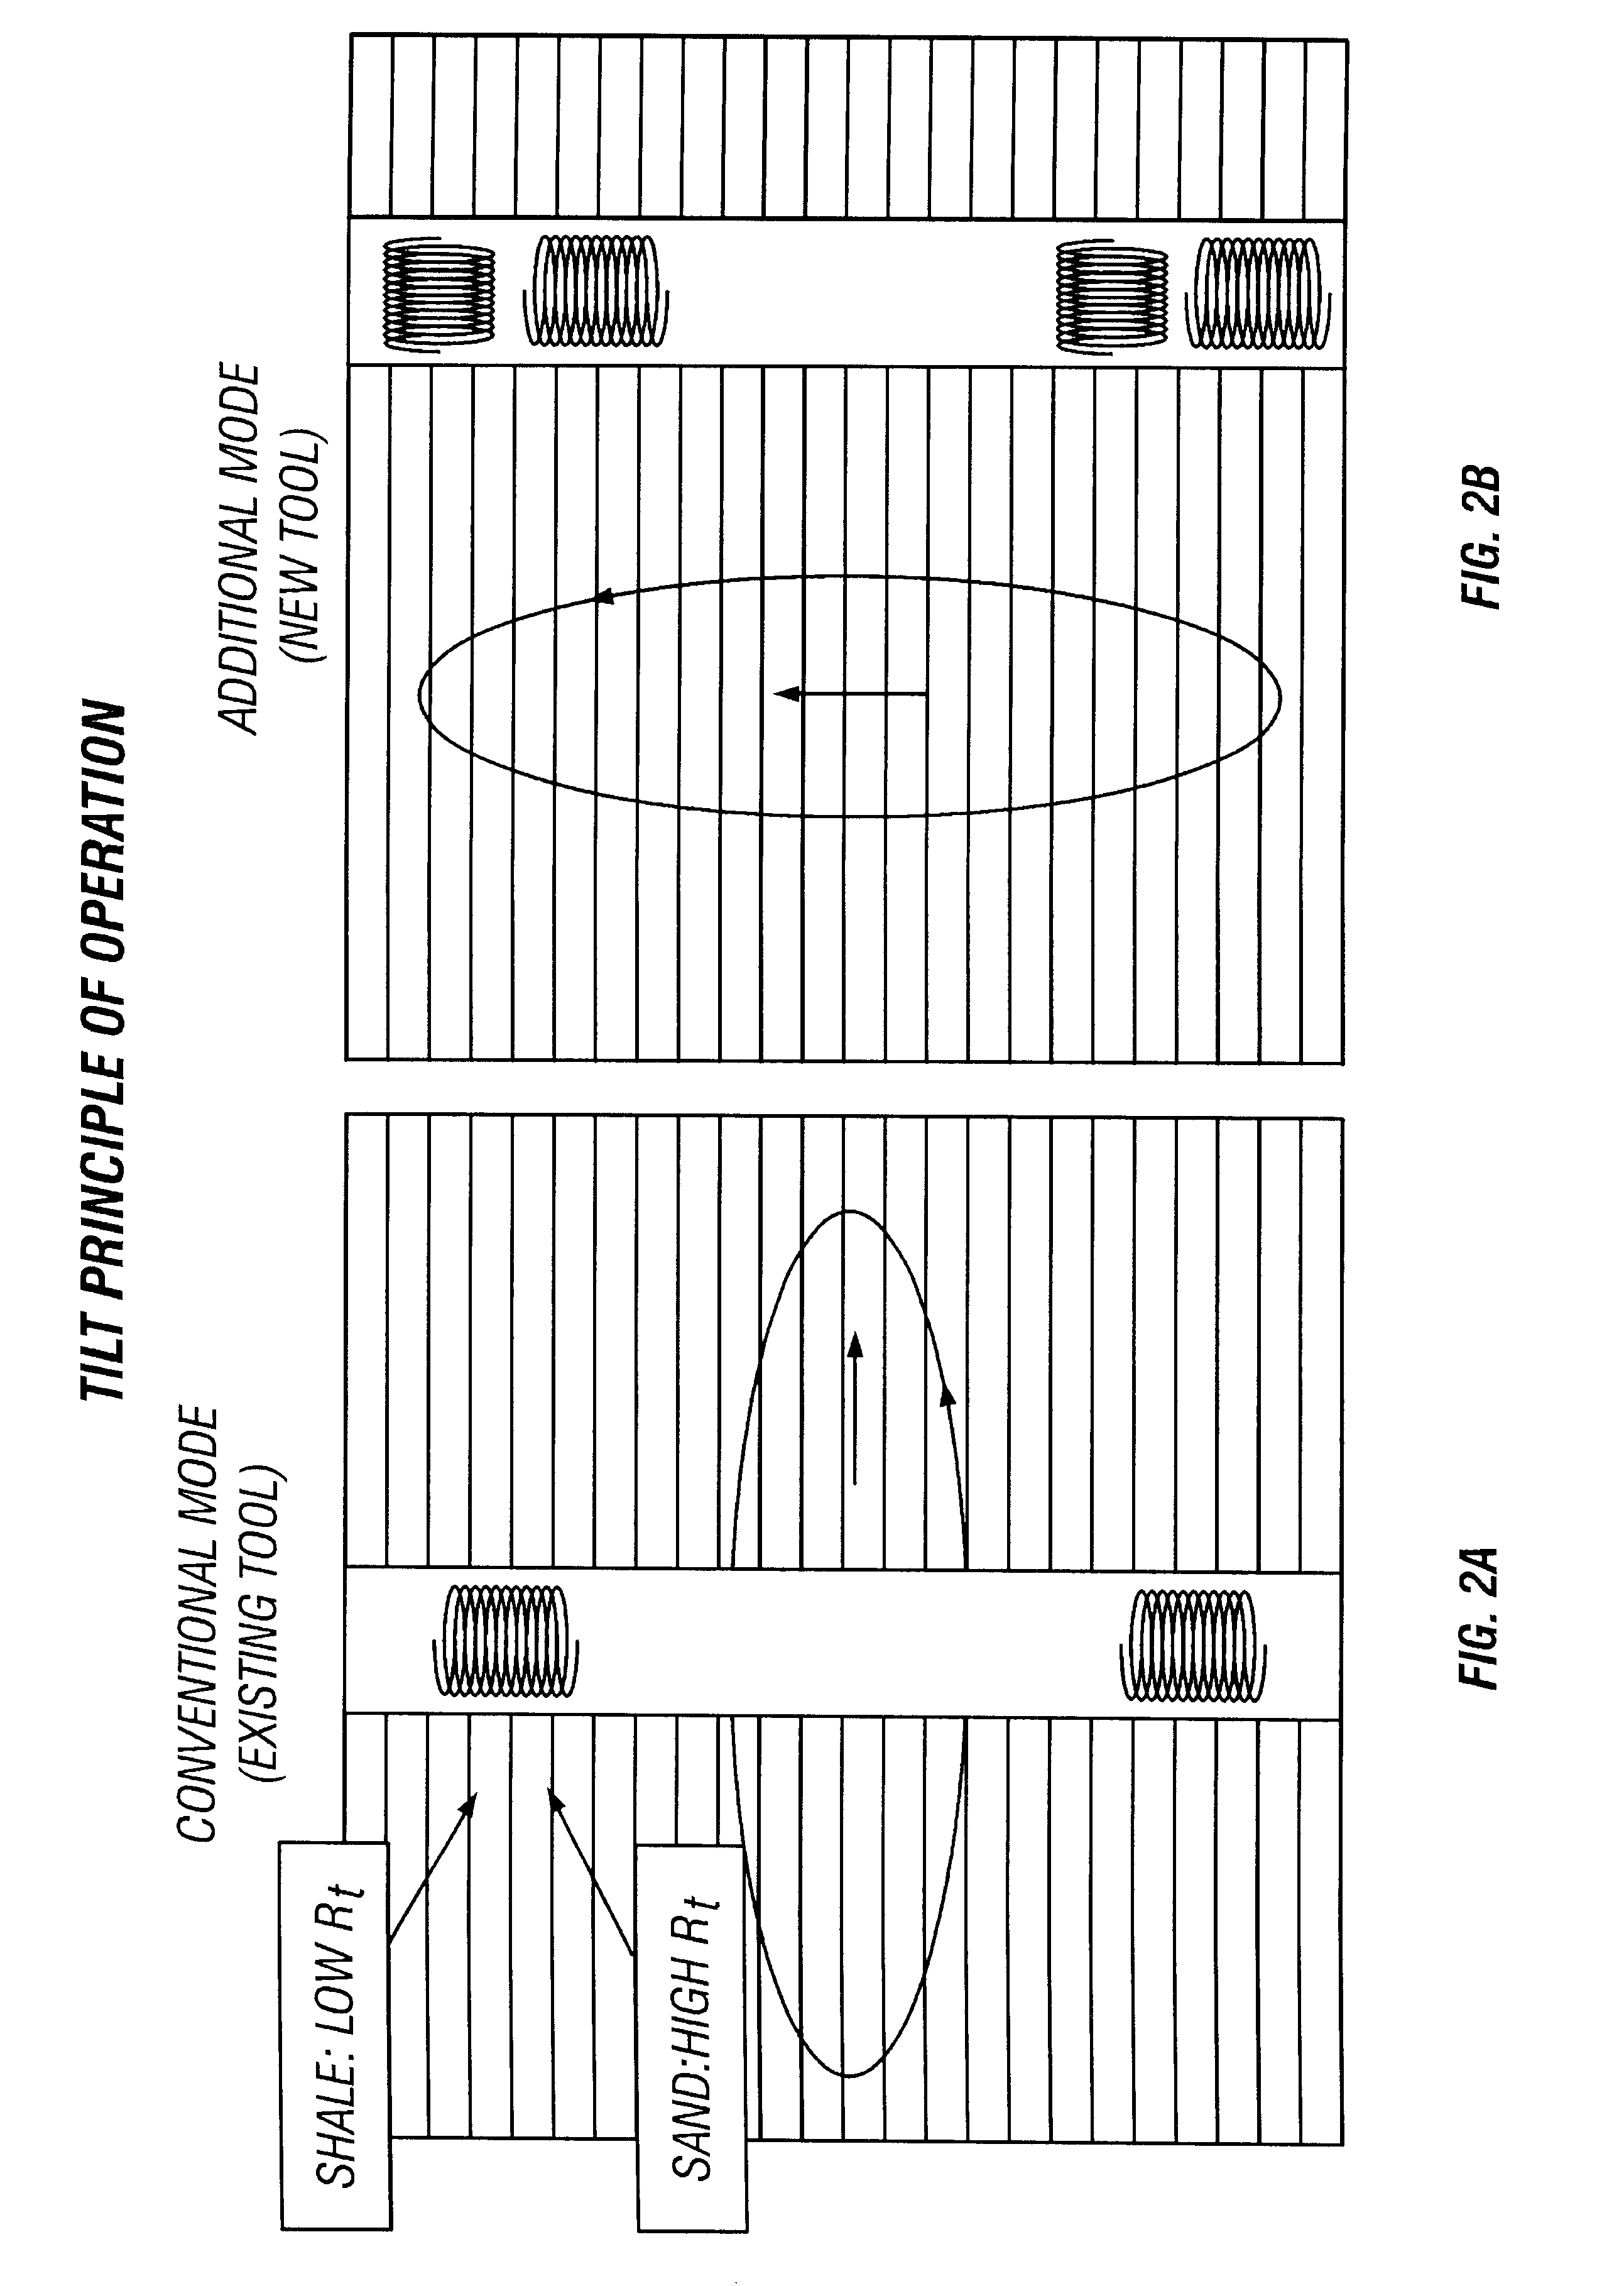 Apparatus accurately measuring properties of a formation